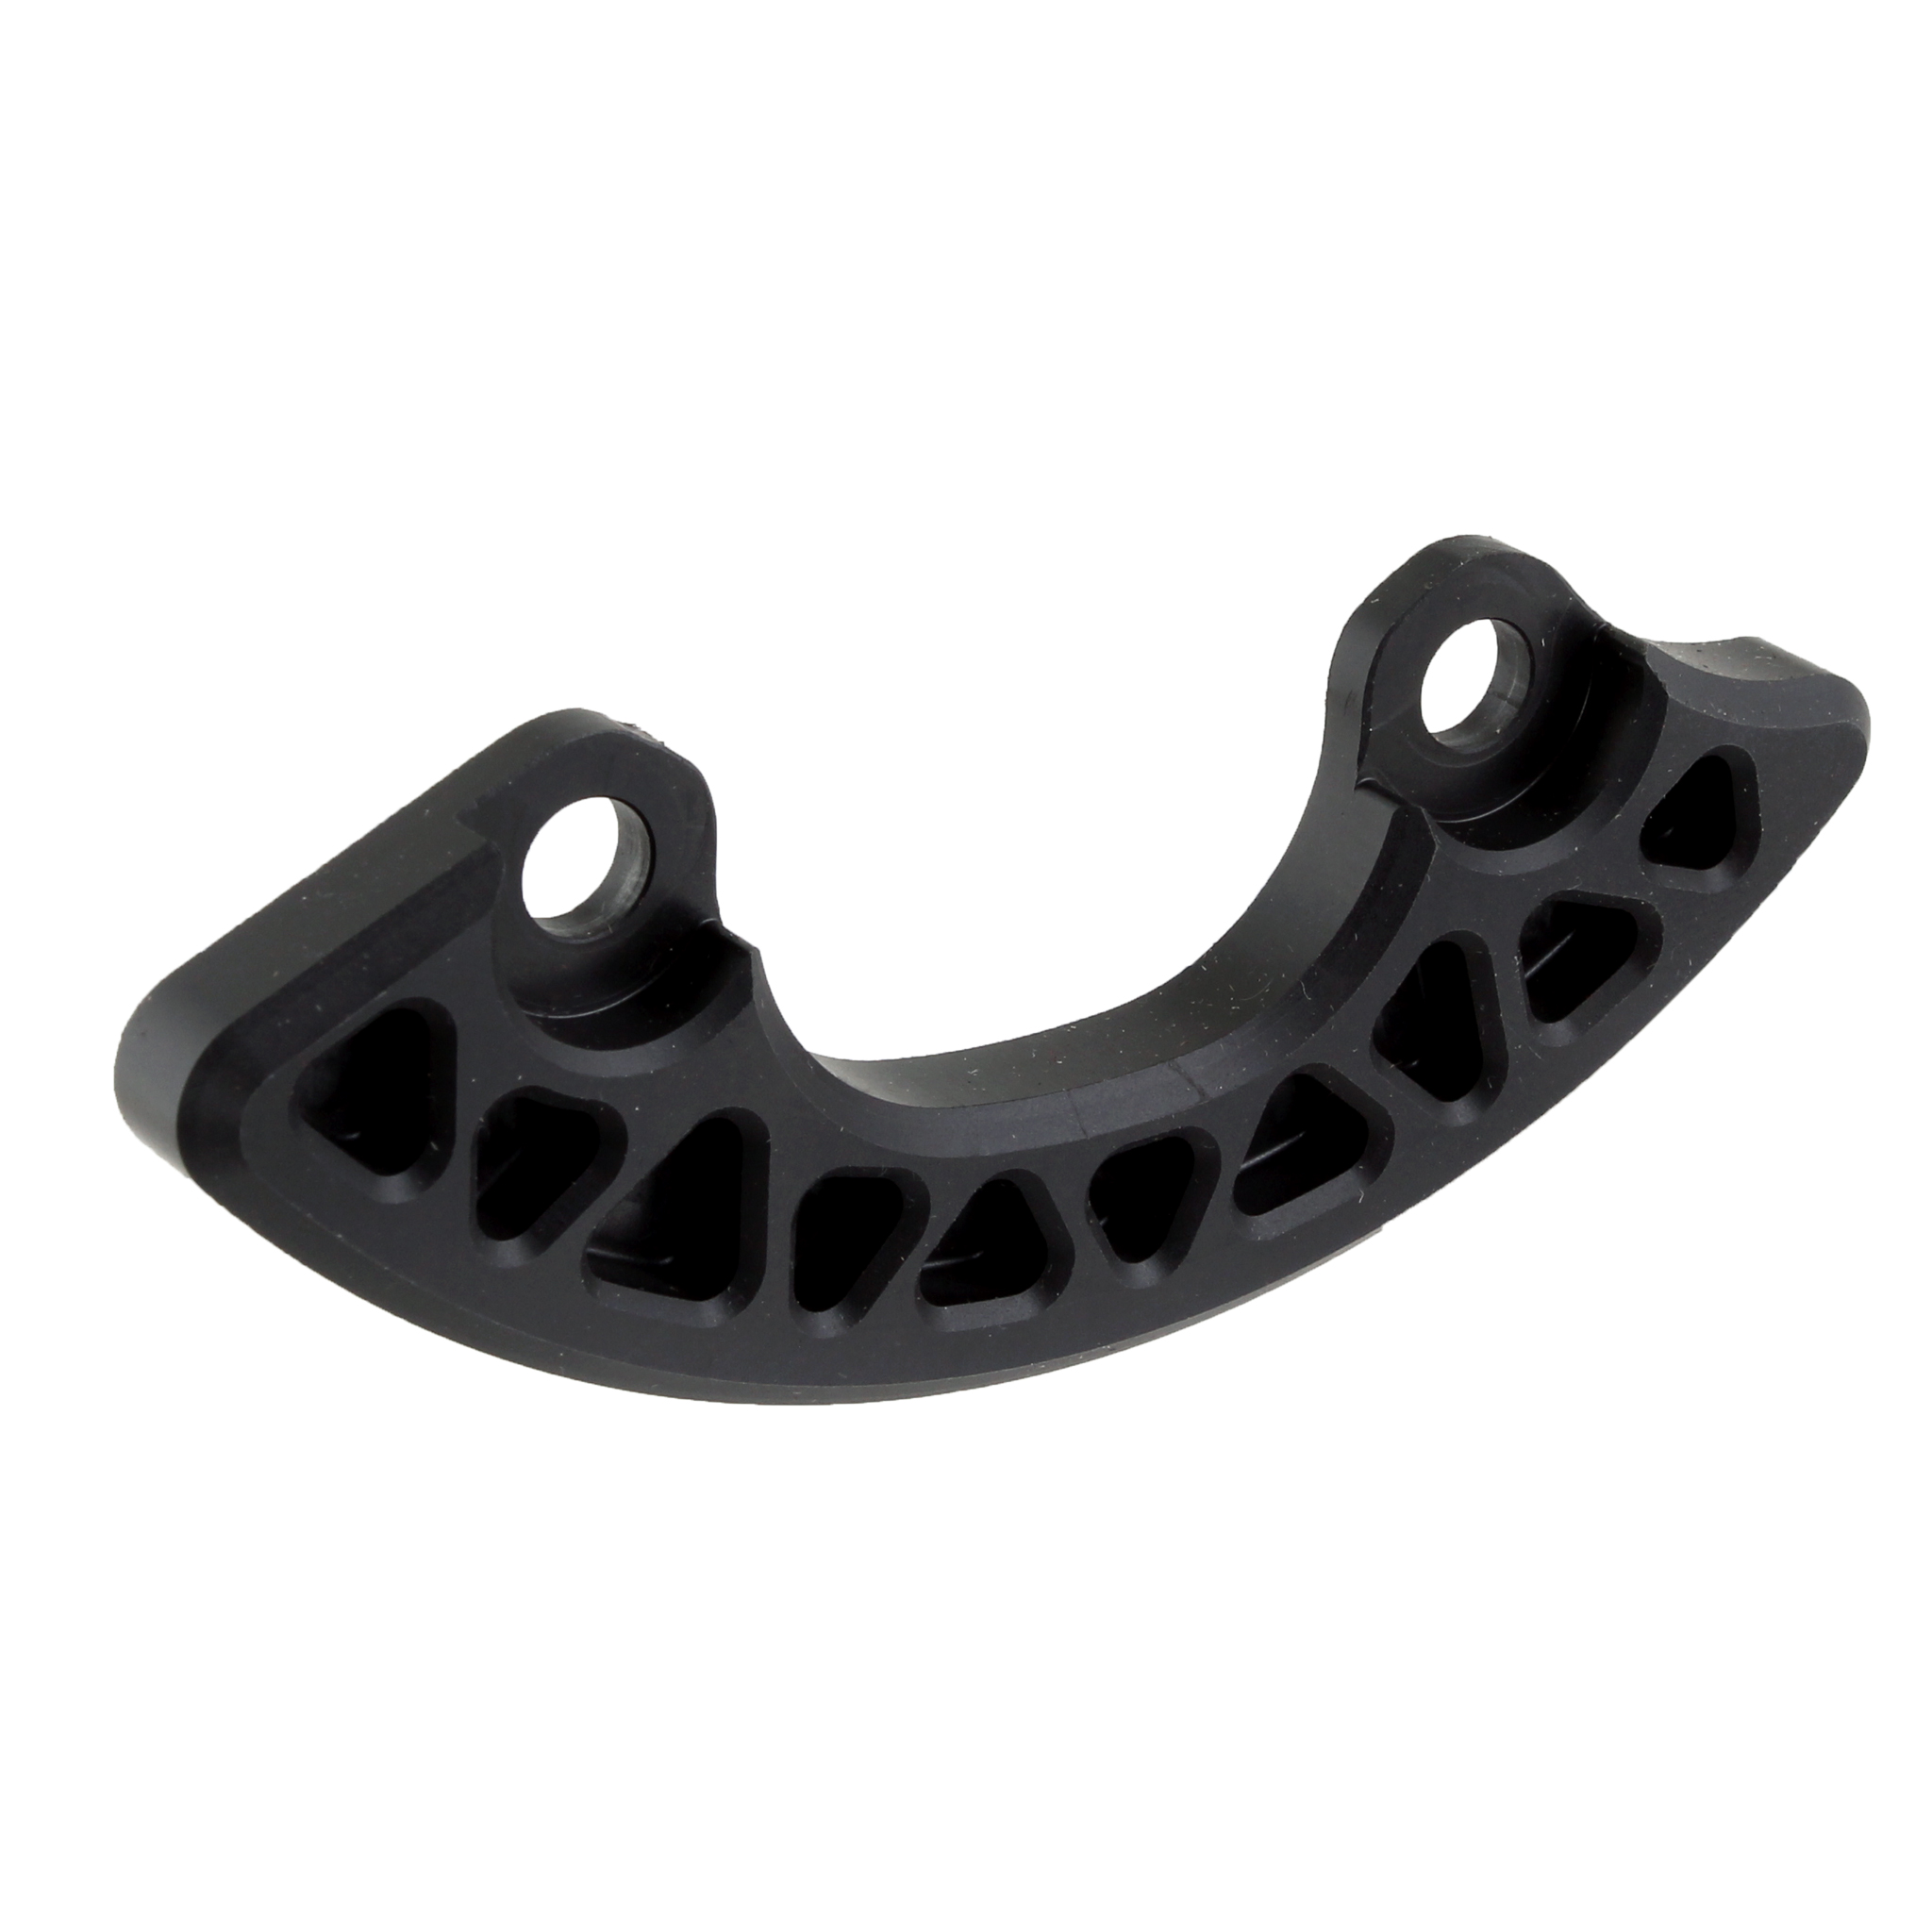 Absolute Black Replacement Taco, Non-Threaded - Black